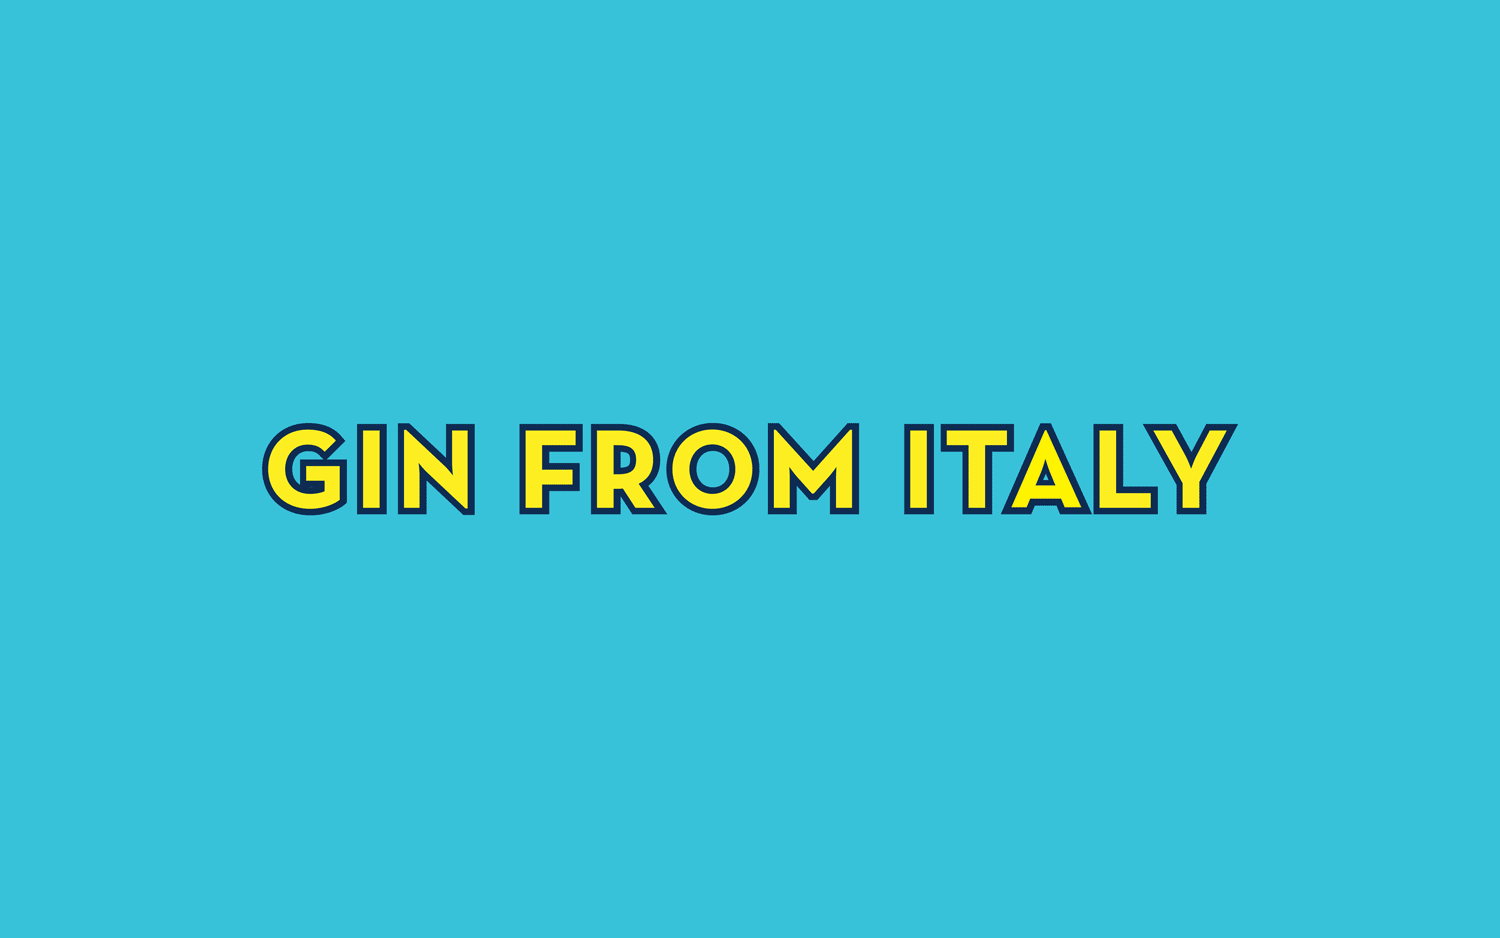 Gin from Italy